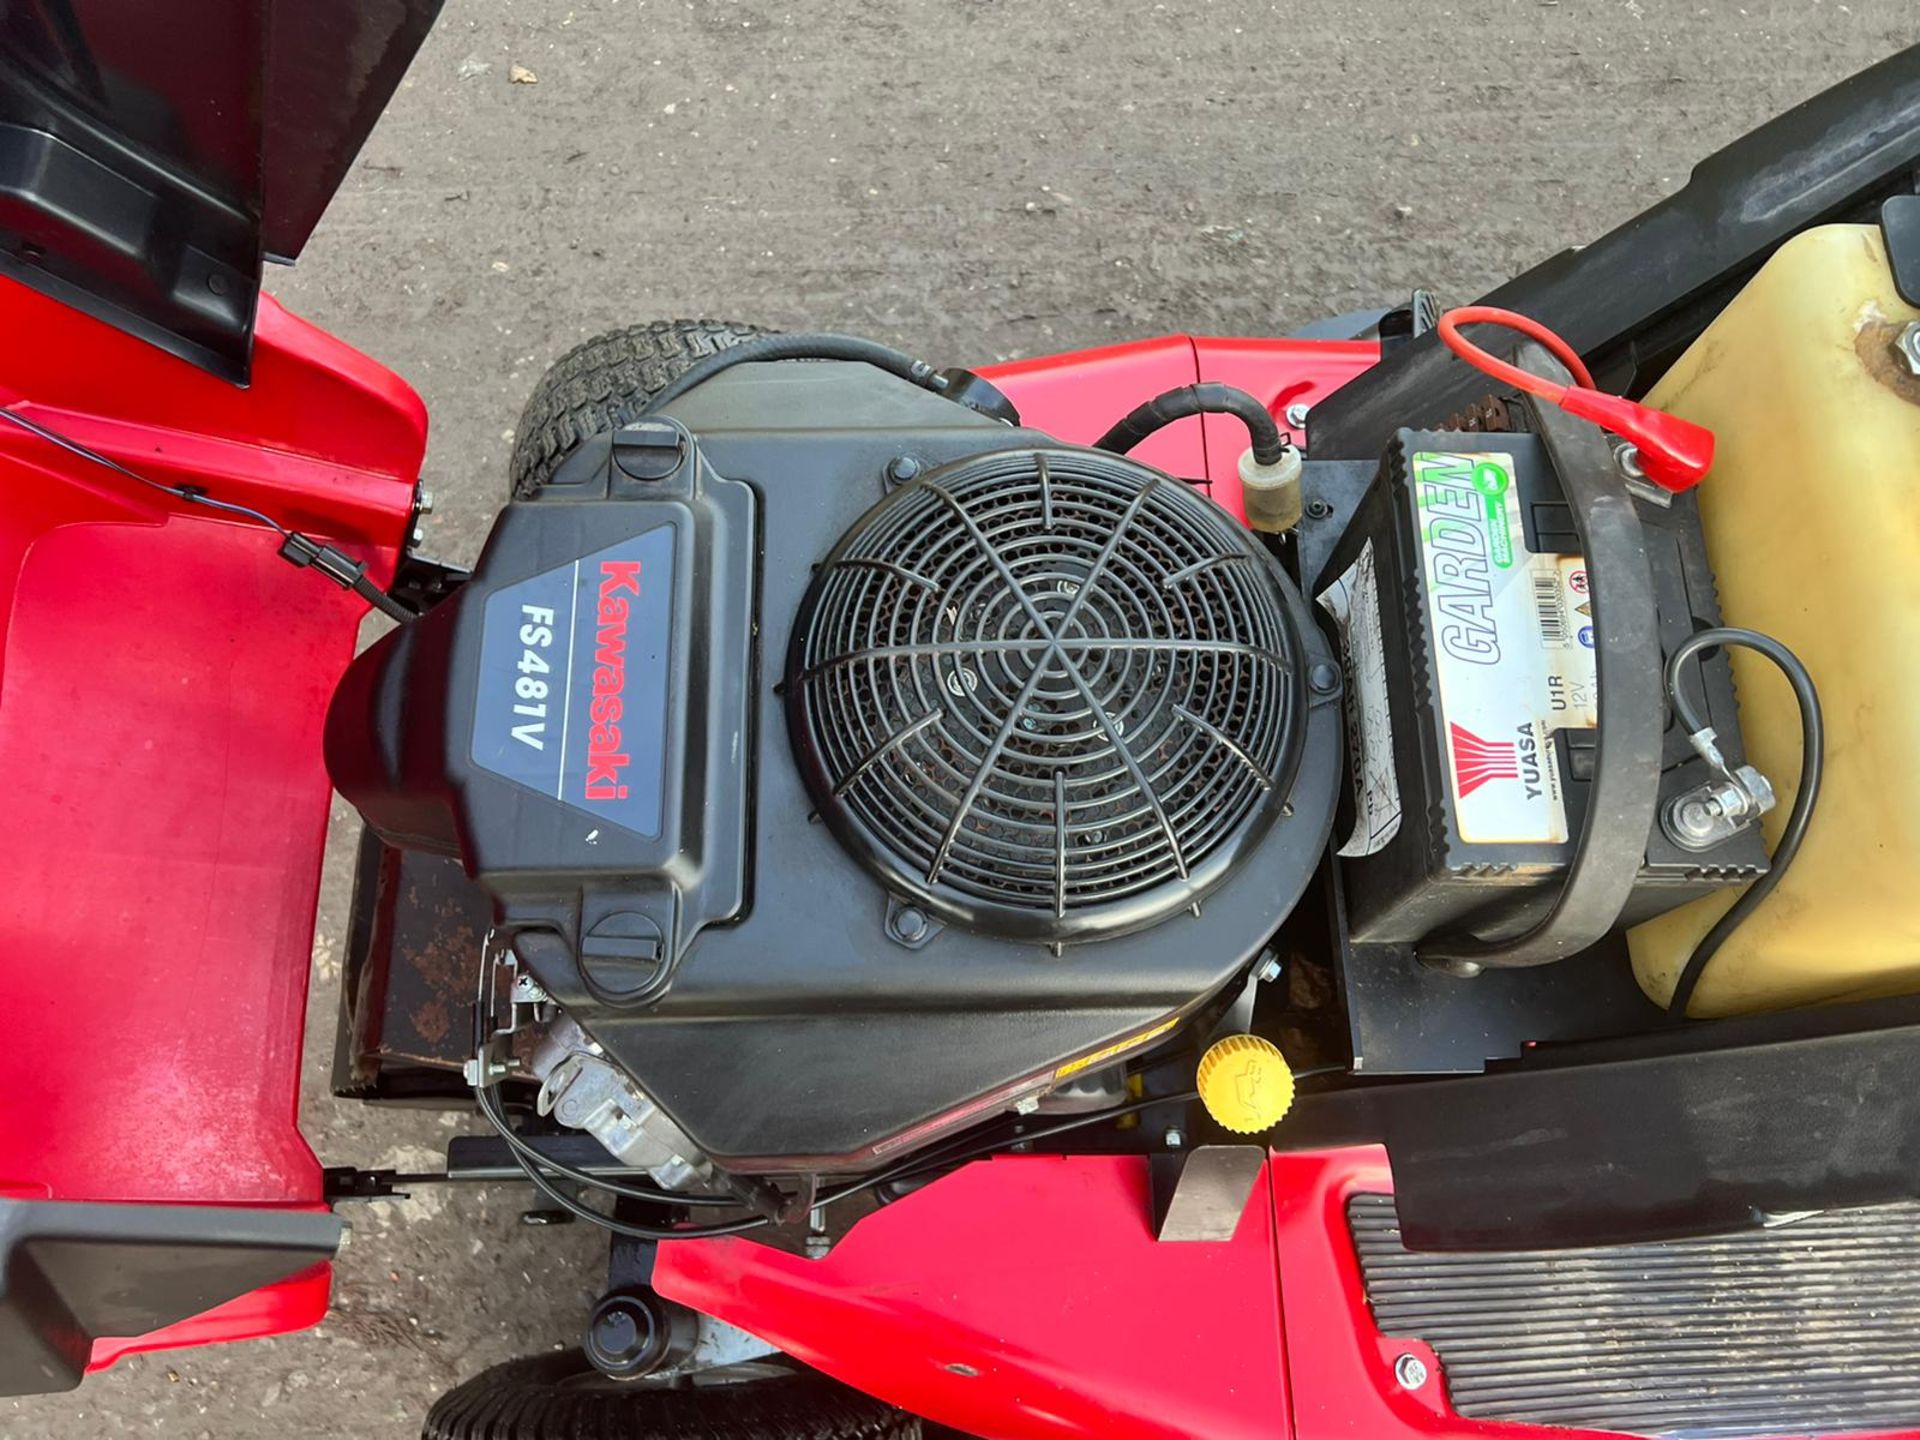 2016 WESTWOOD/COUNTAX 60 RIDE ON LAWN MOWER WITH PGC, SHOWING A LOW 102 HOURS *NO VAT* - Image 8 of 8